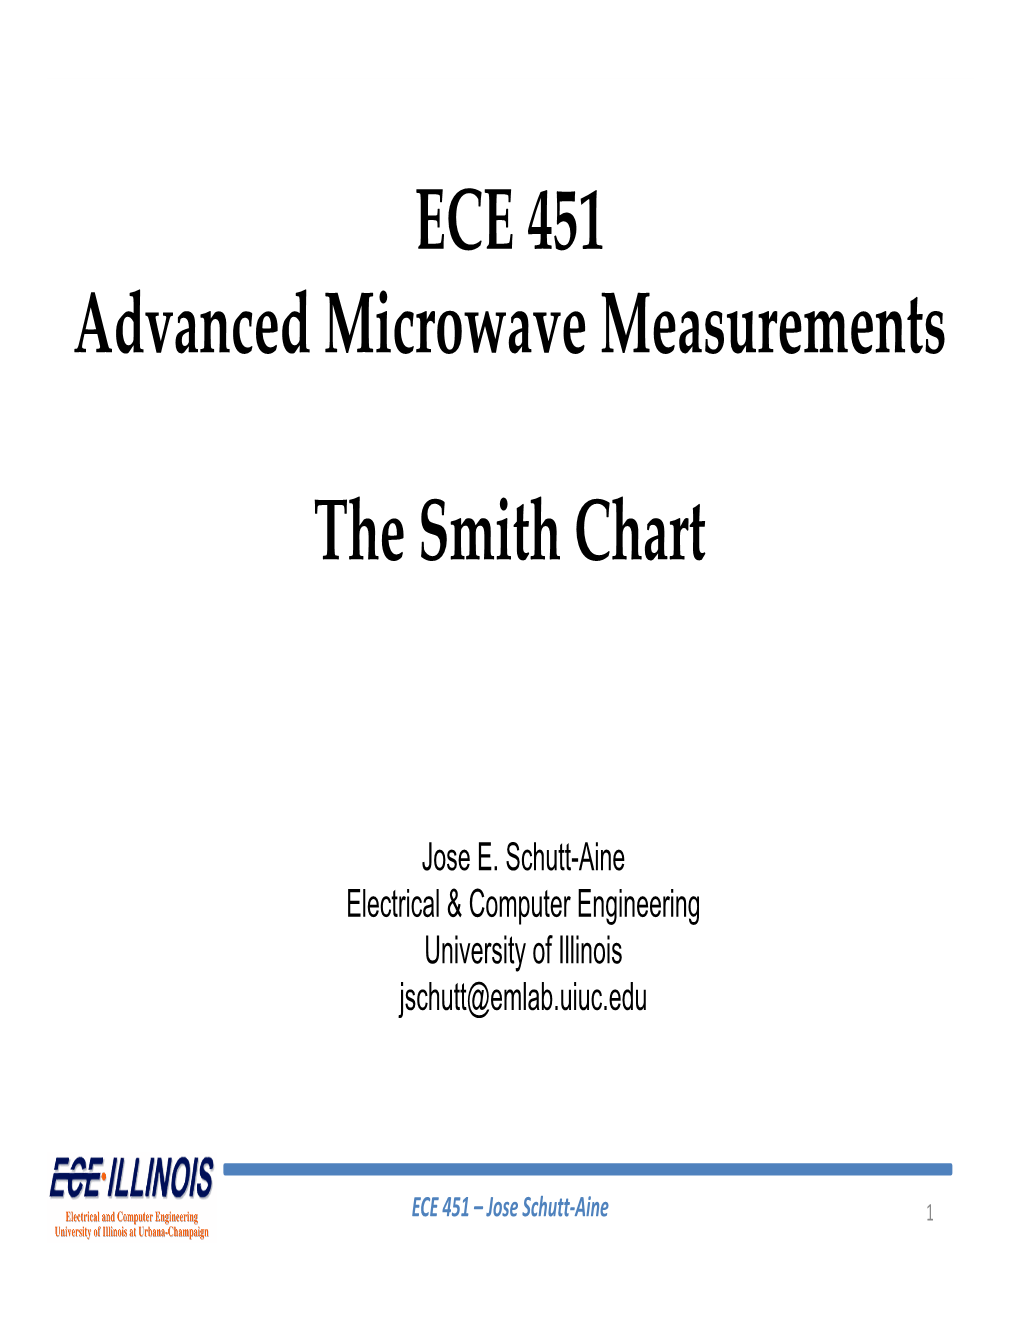 ECE 451 Advanced Microwave Measurements the Smith Chart